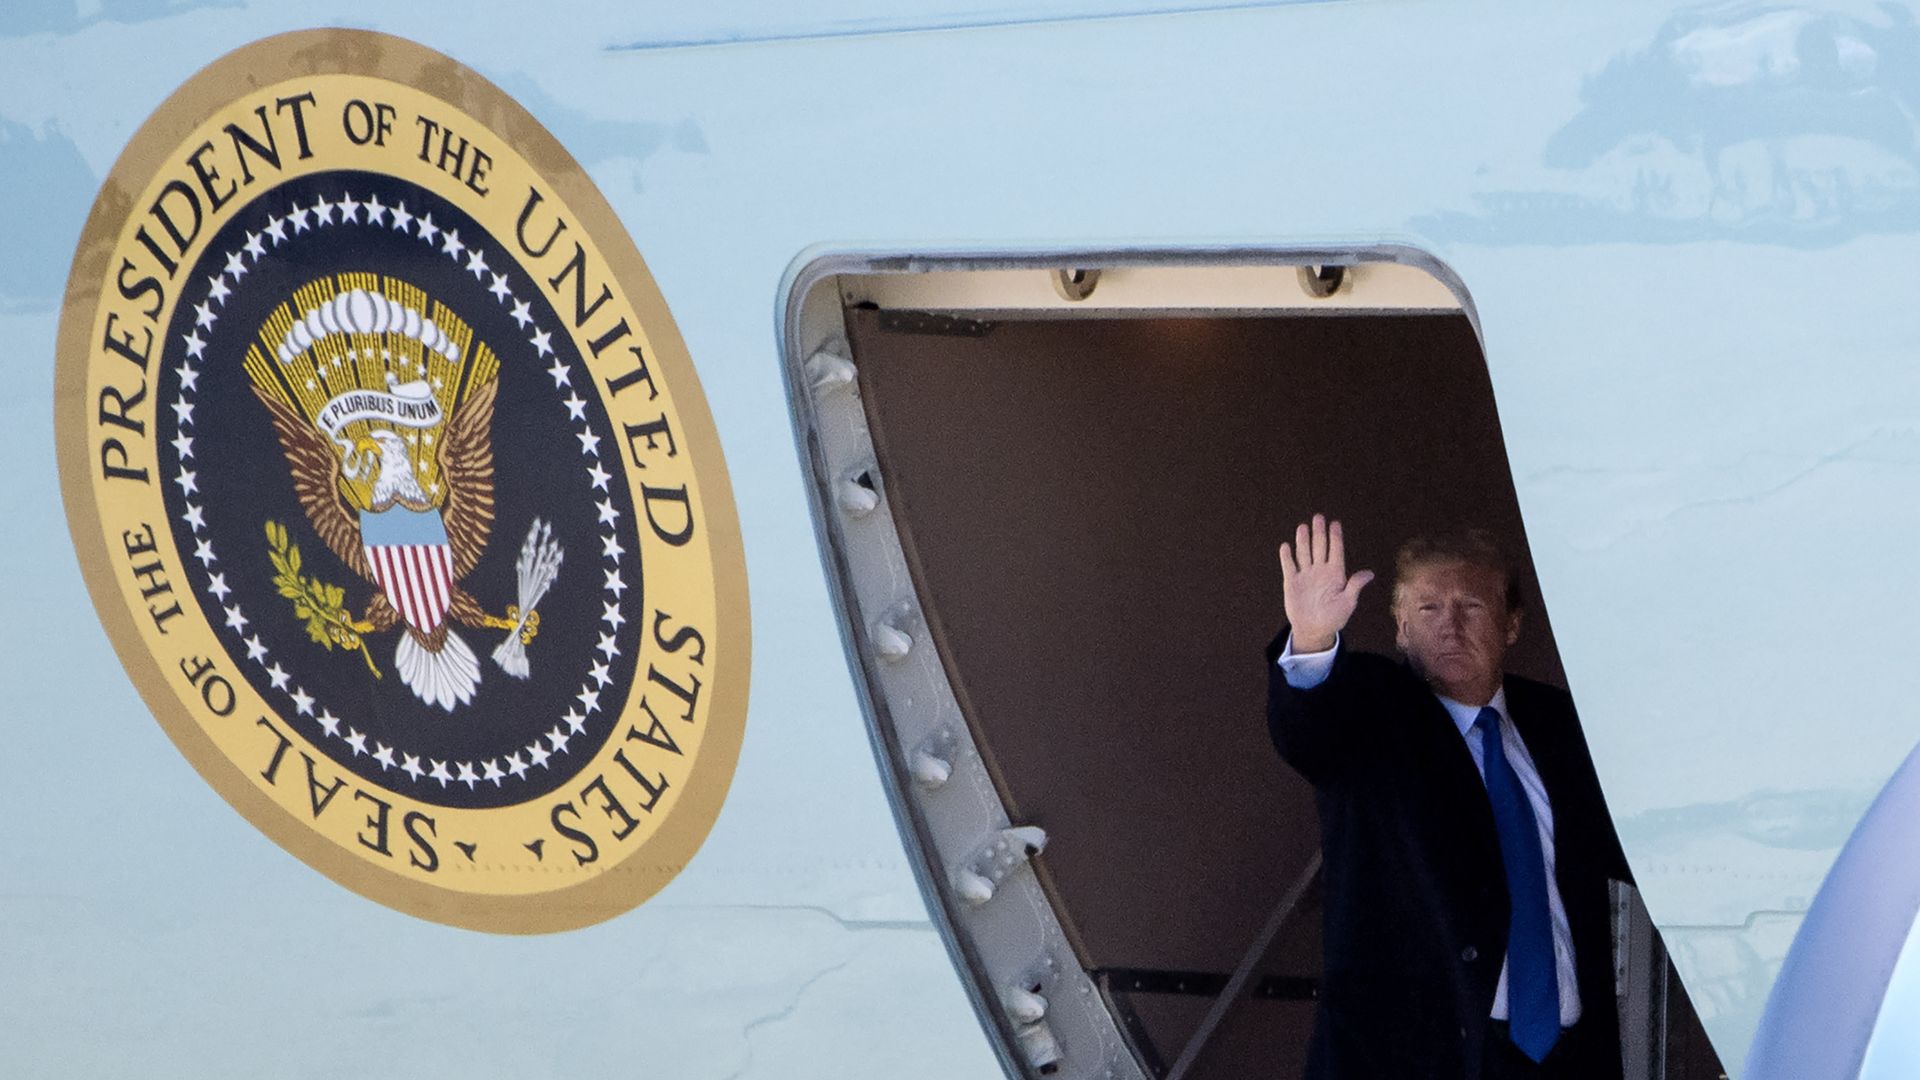 President Donald Trump waves as he boards Air Force One to depart for Vietnam for a summit with North Korean leader Kim Jong Un on February 25, 2019 